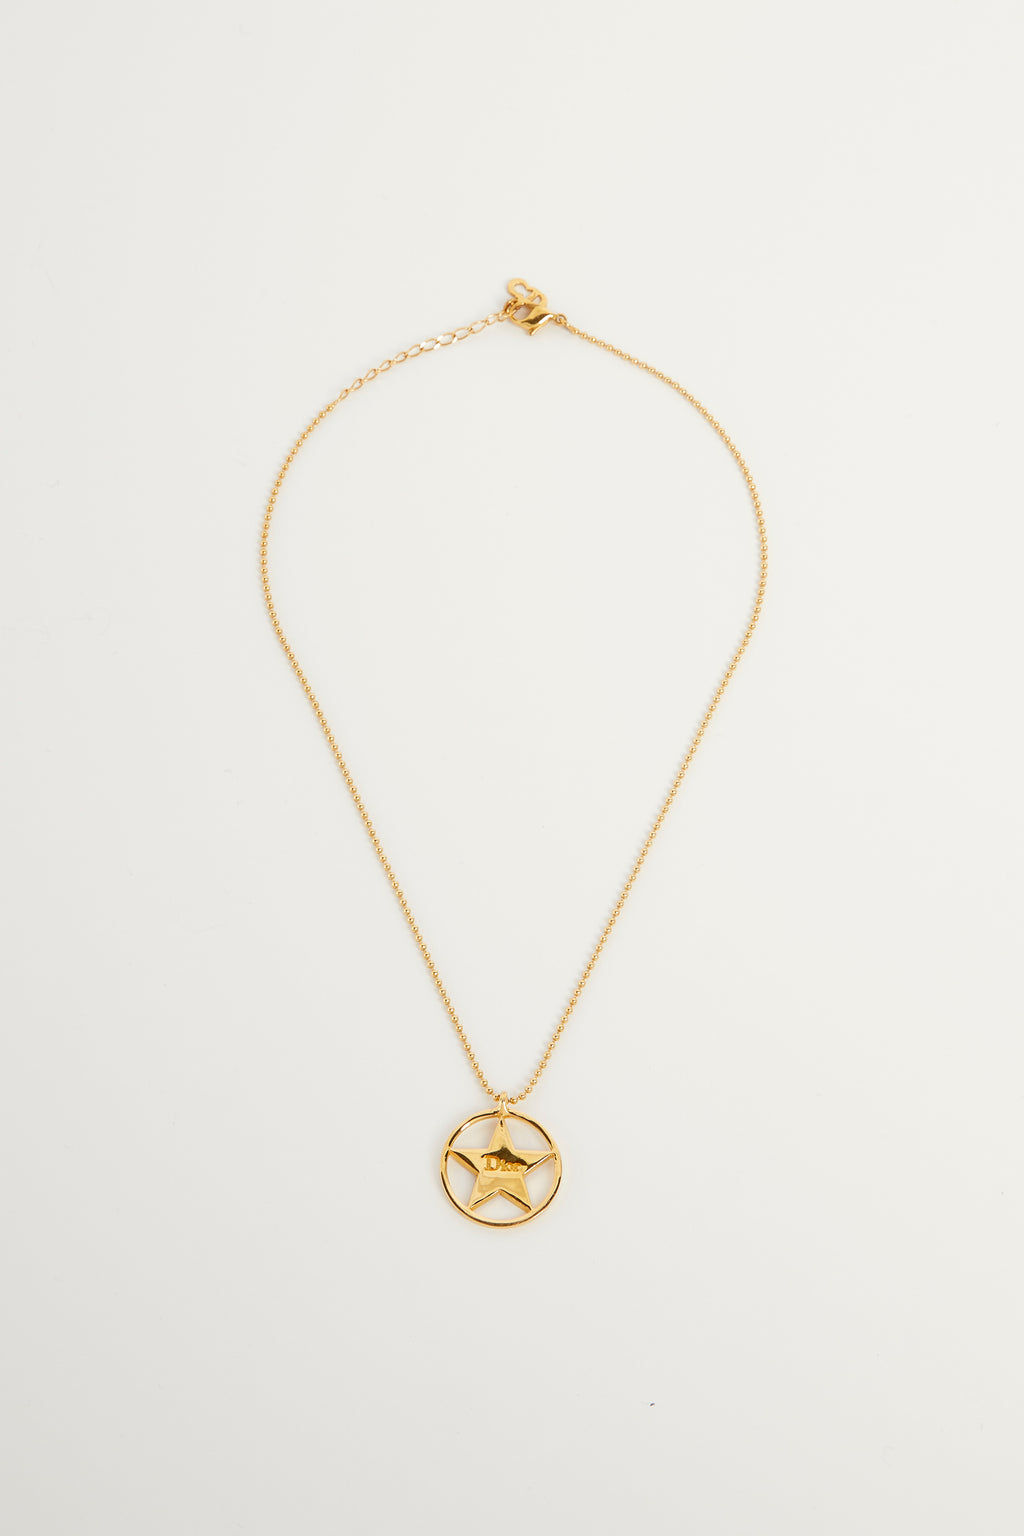 Y2K Christian Dior Red Star Gold Necklace